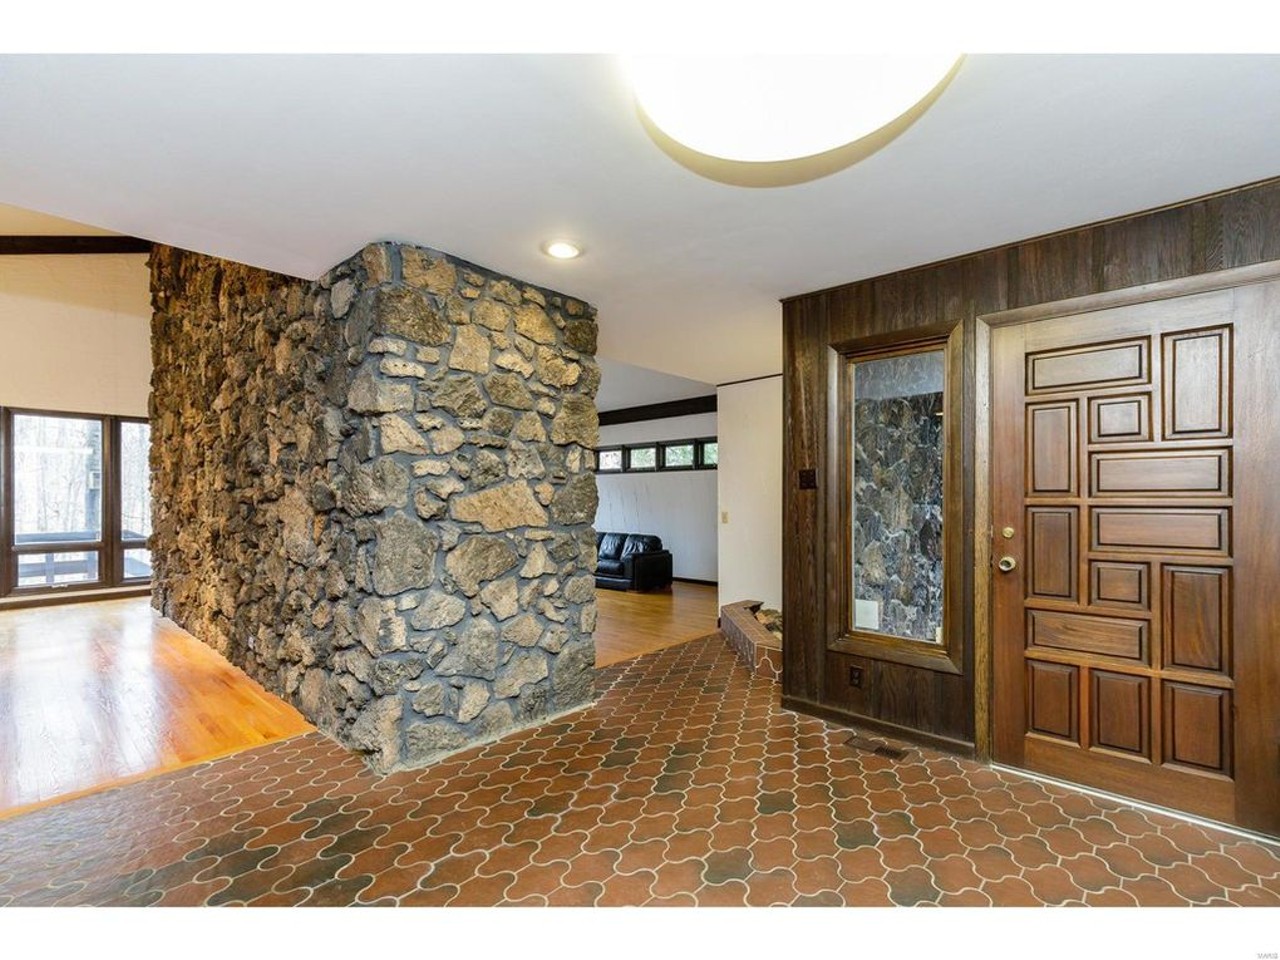 This Modern House Has a Rock Wall and a Huge Bar in the Basement [PHOTOS]